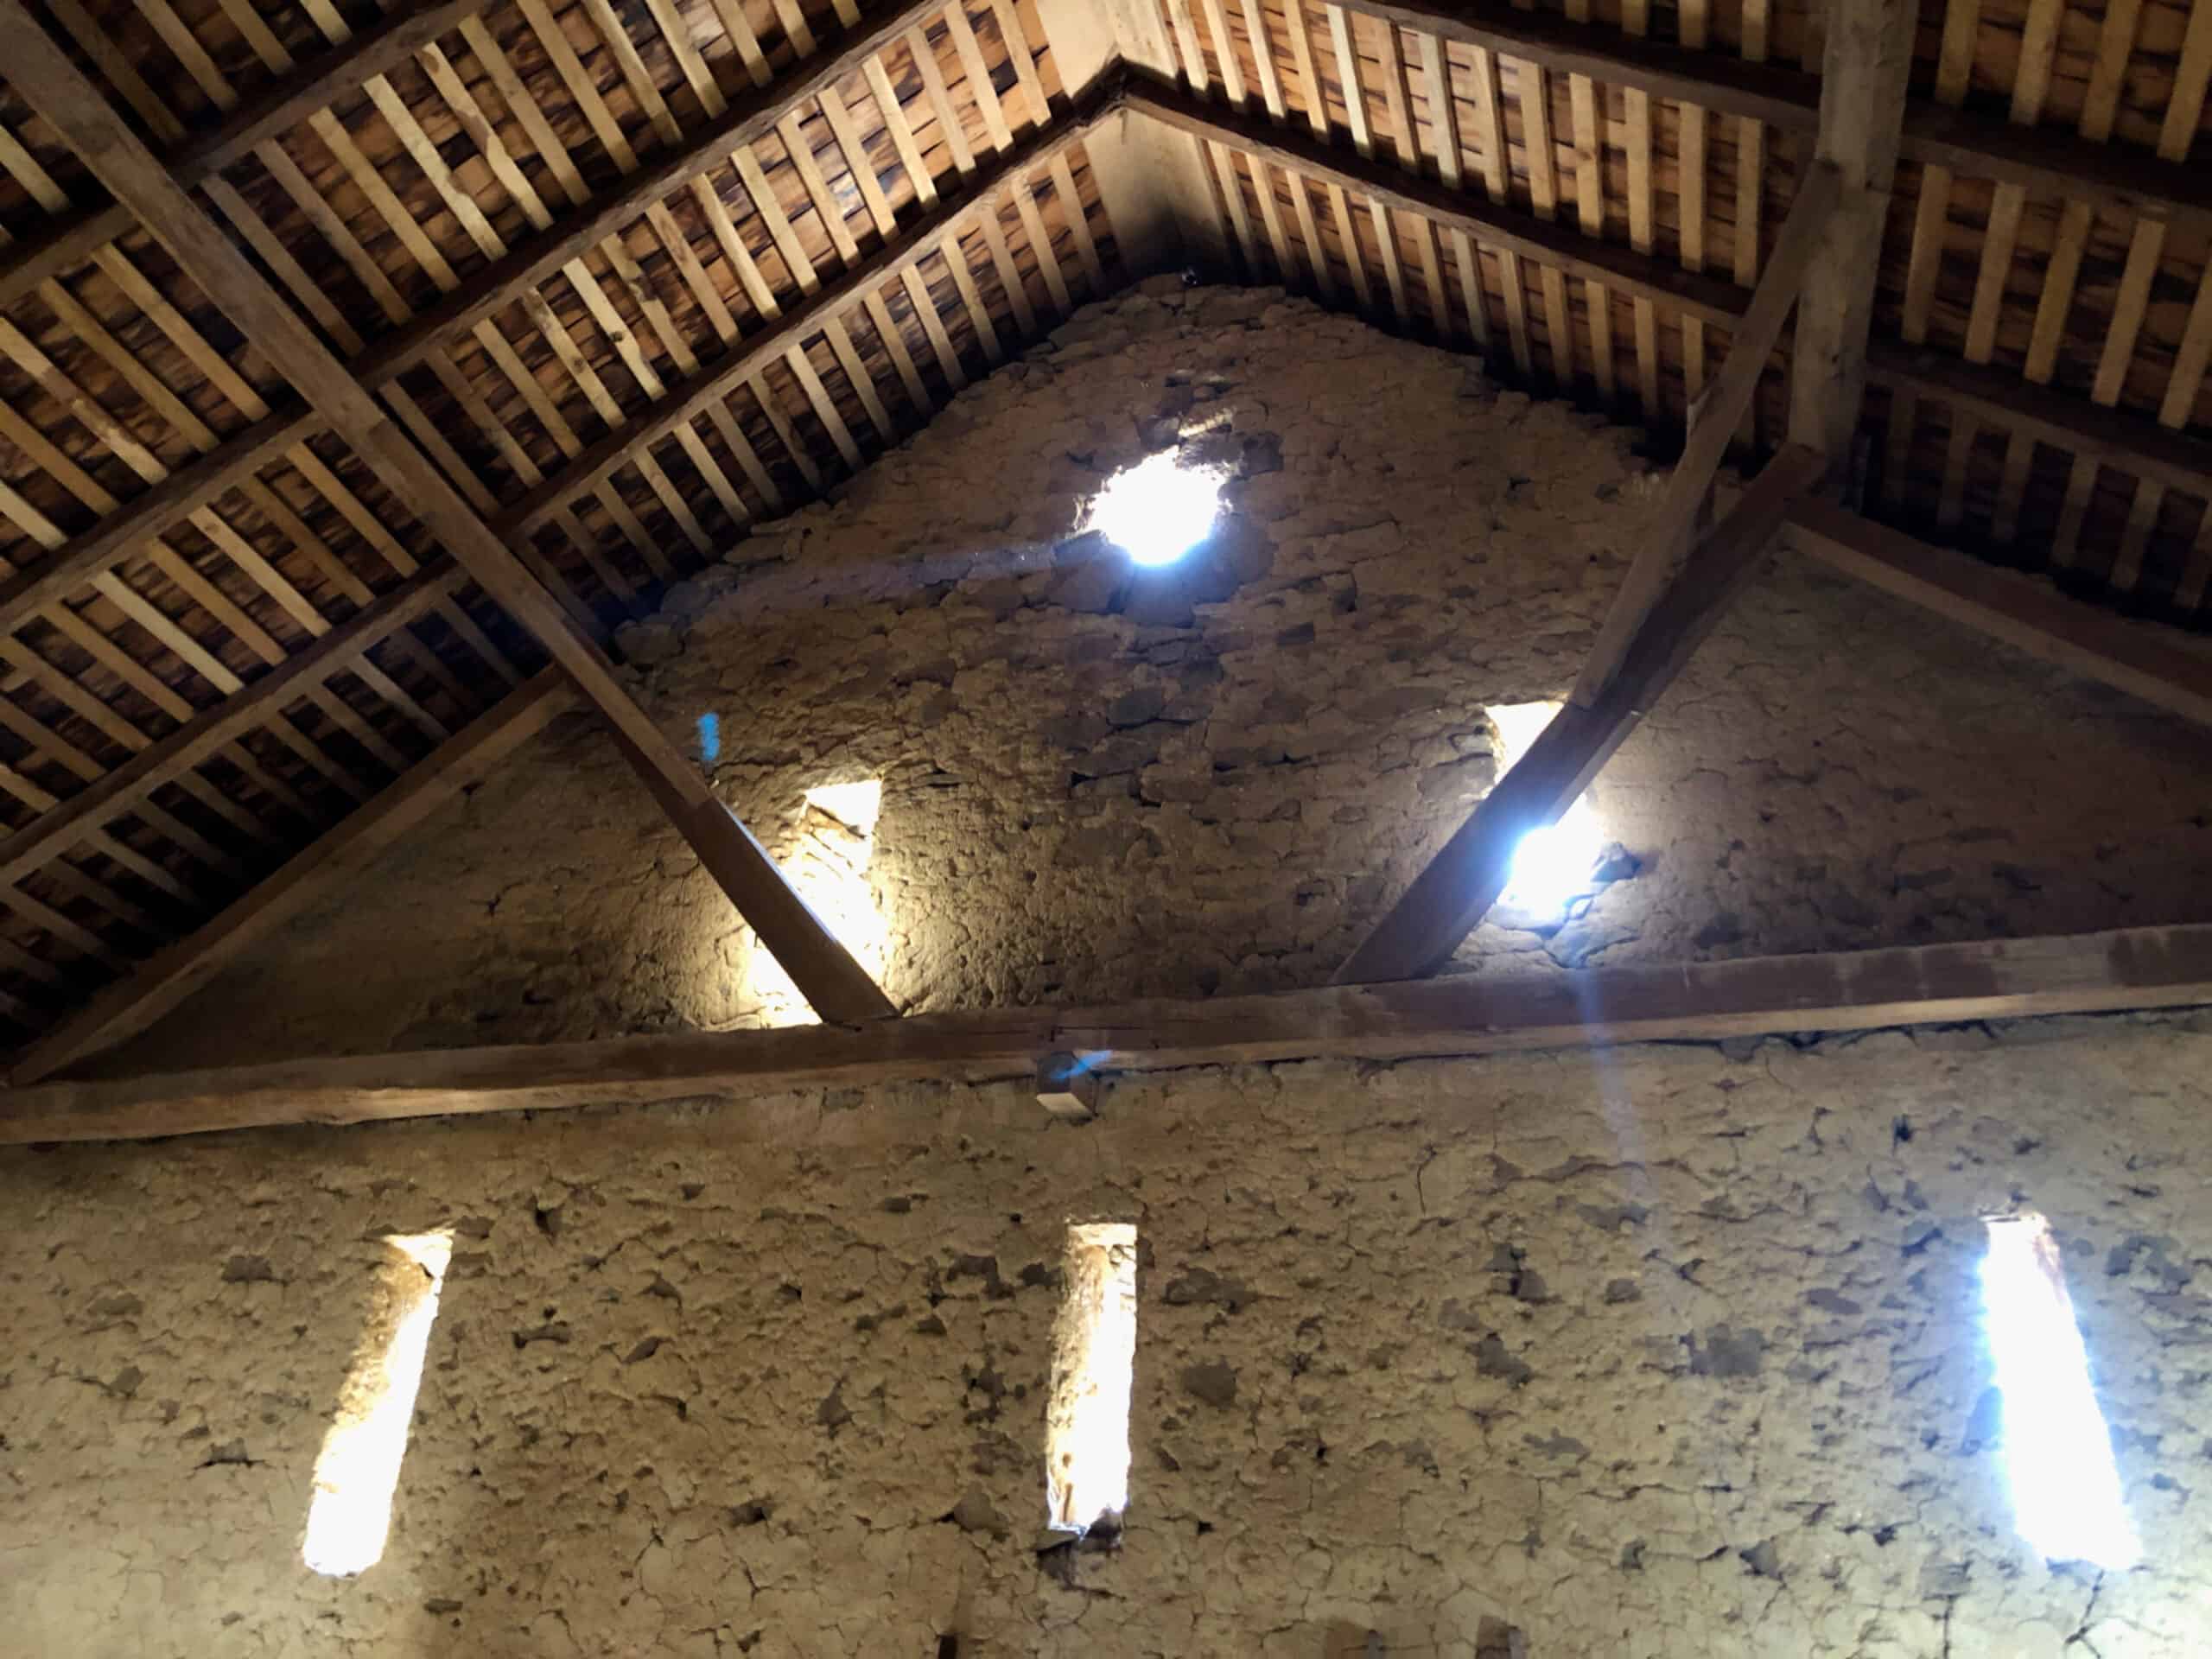 Interior view of historic barn at Crow's Nest Preserve showing queen trusses and ventilation slots in masonry wall.